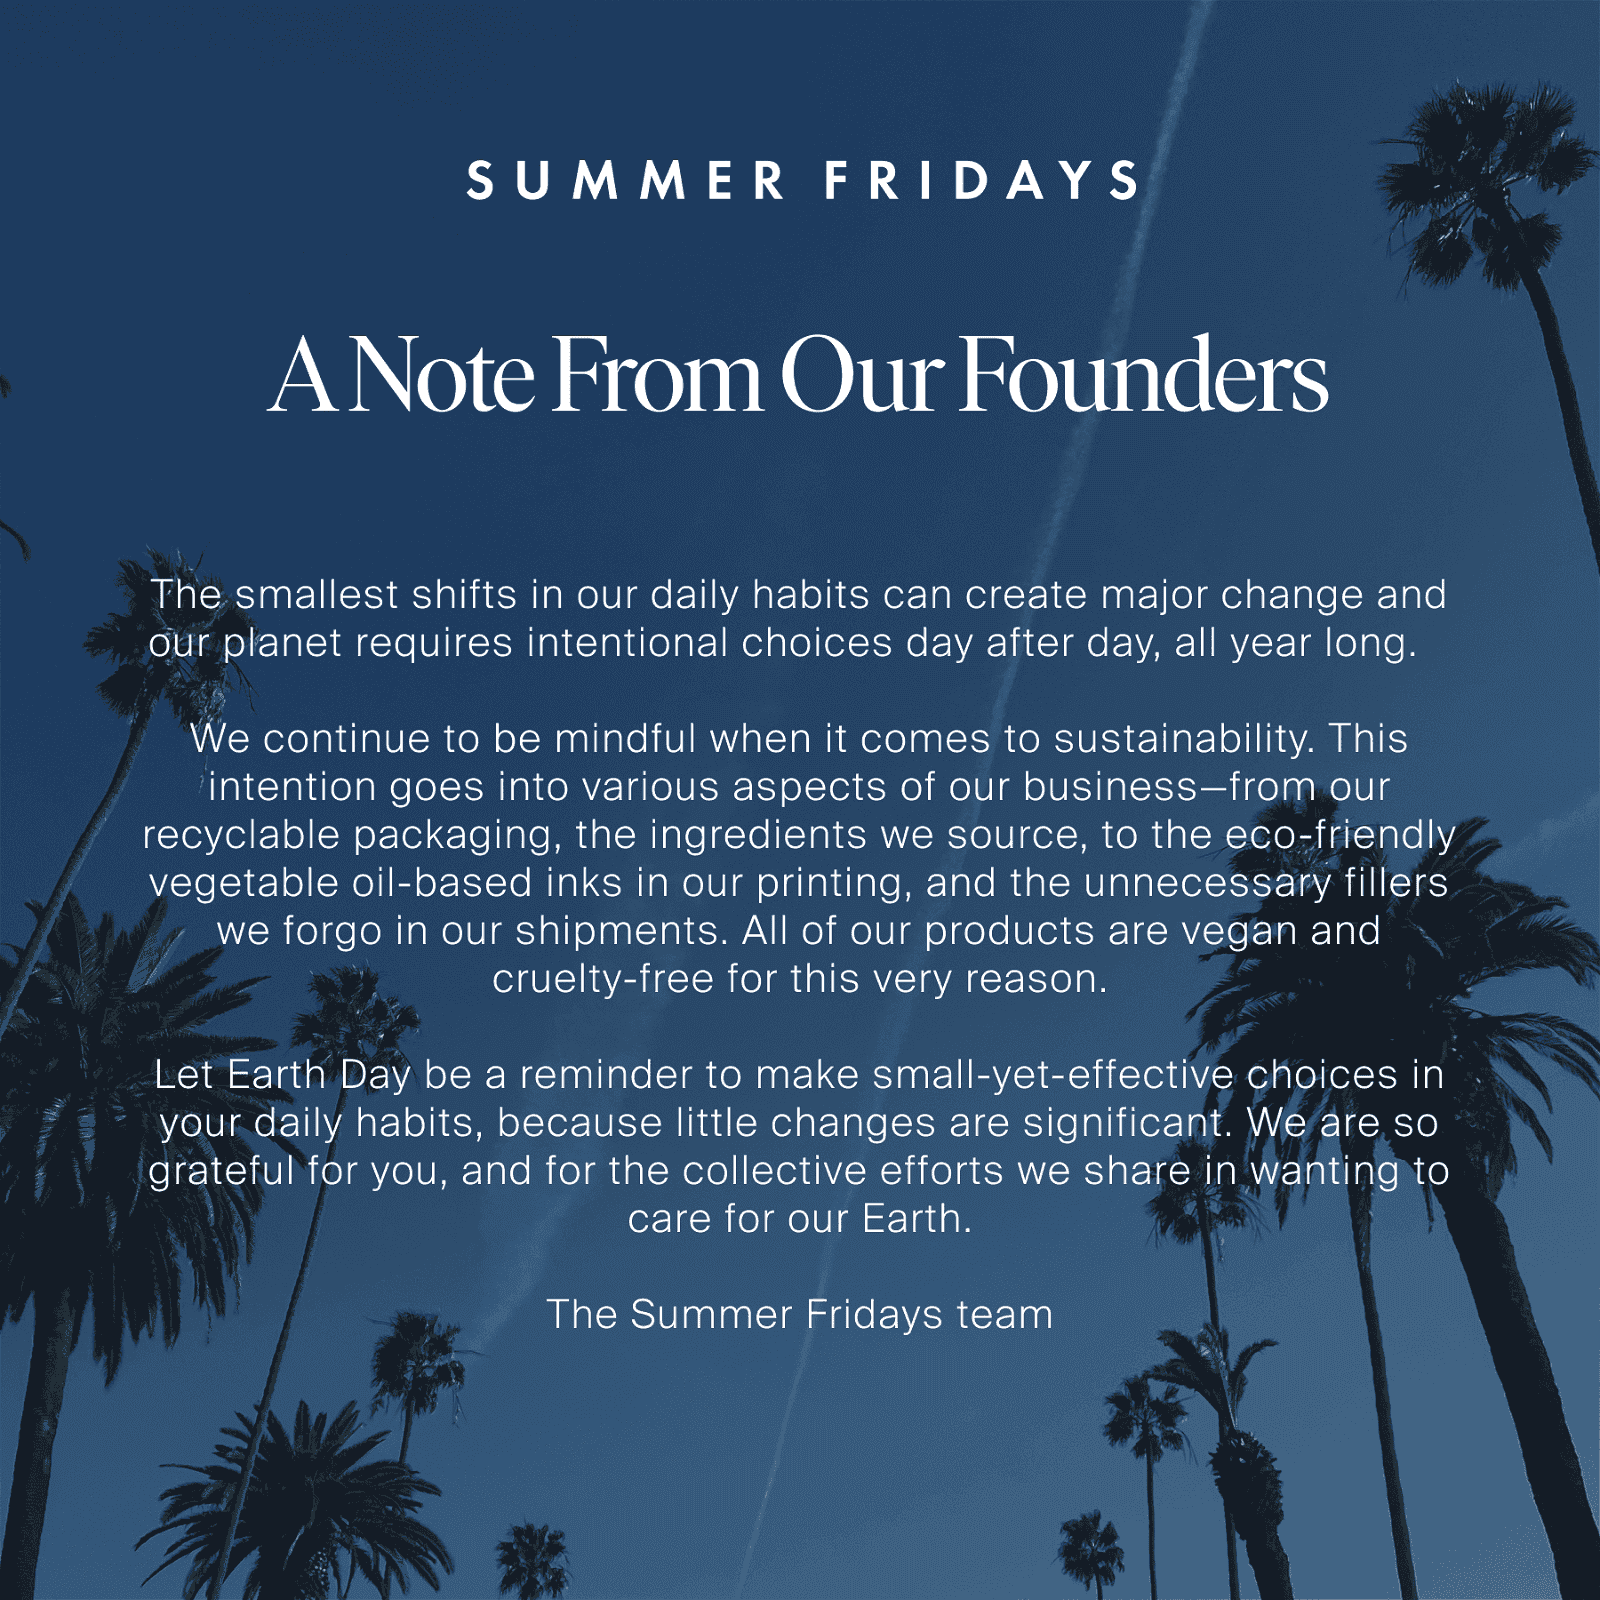 A Note from our Founders